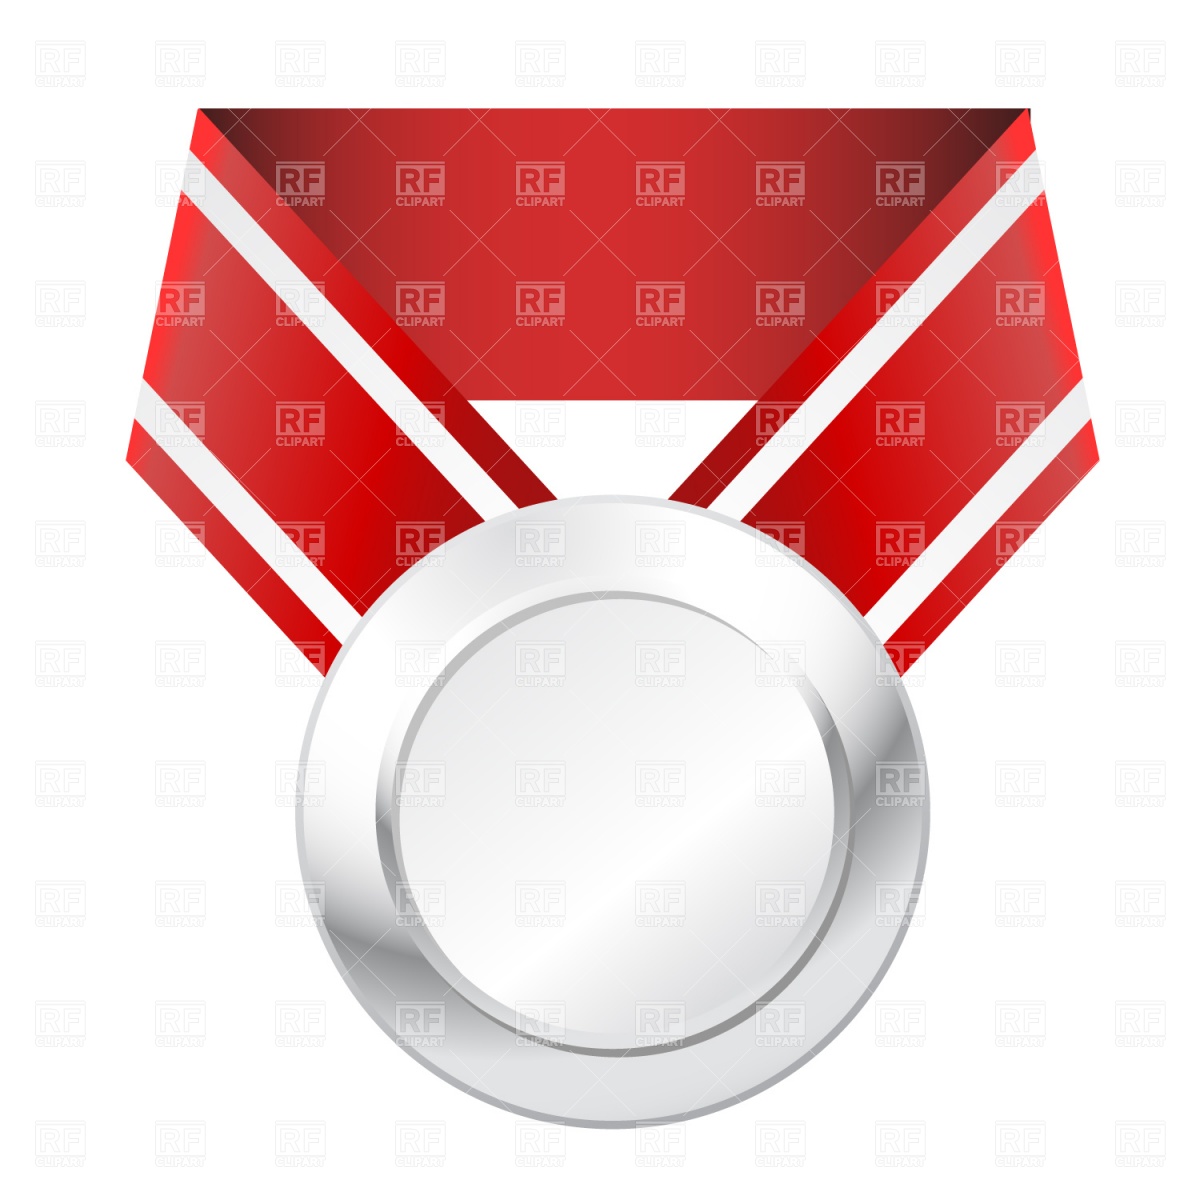 Medal Clipart Free